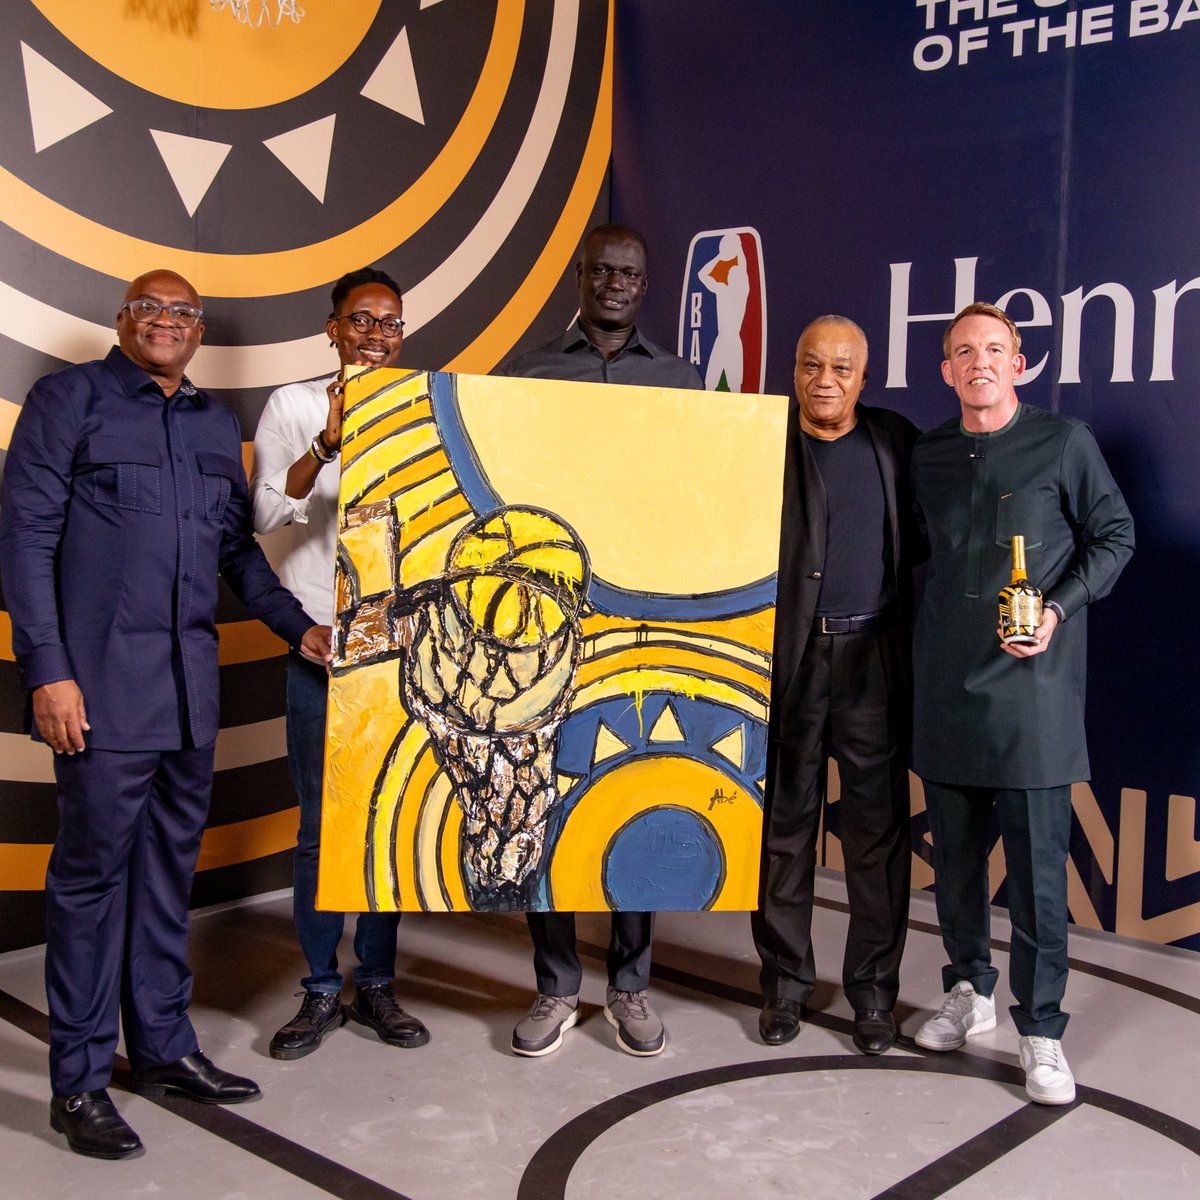 🌟 The fusion of @hennessy’s spirit with culture, art, and sports ignites a celebration like no other. An unforgettable night in Abidjan! ✨ #BALINABIDJAN #Hennessy